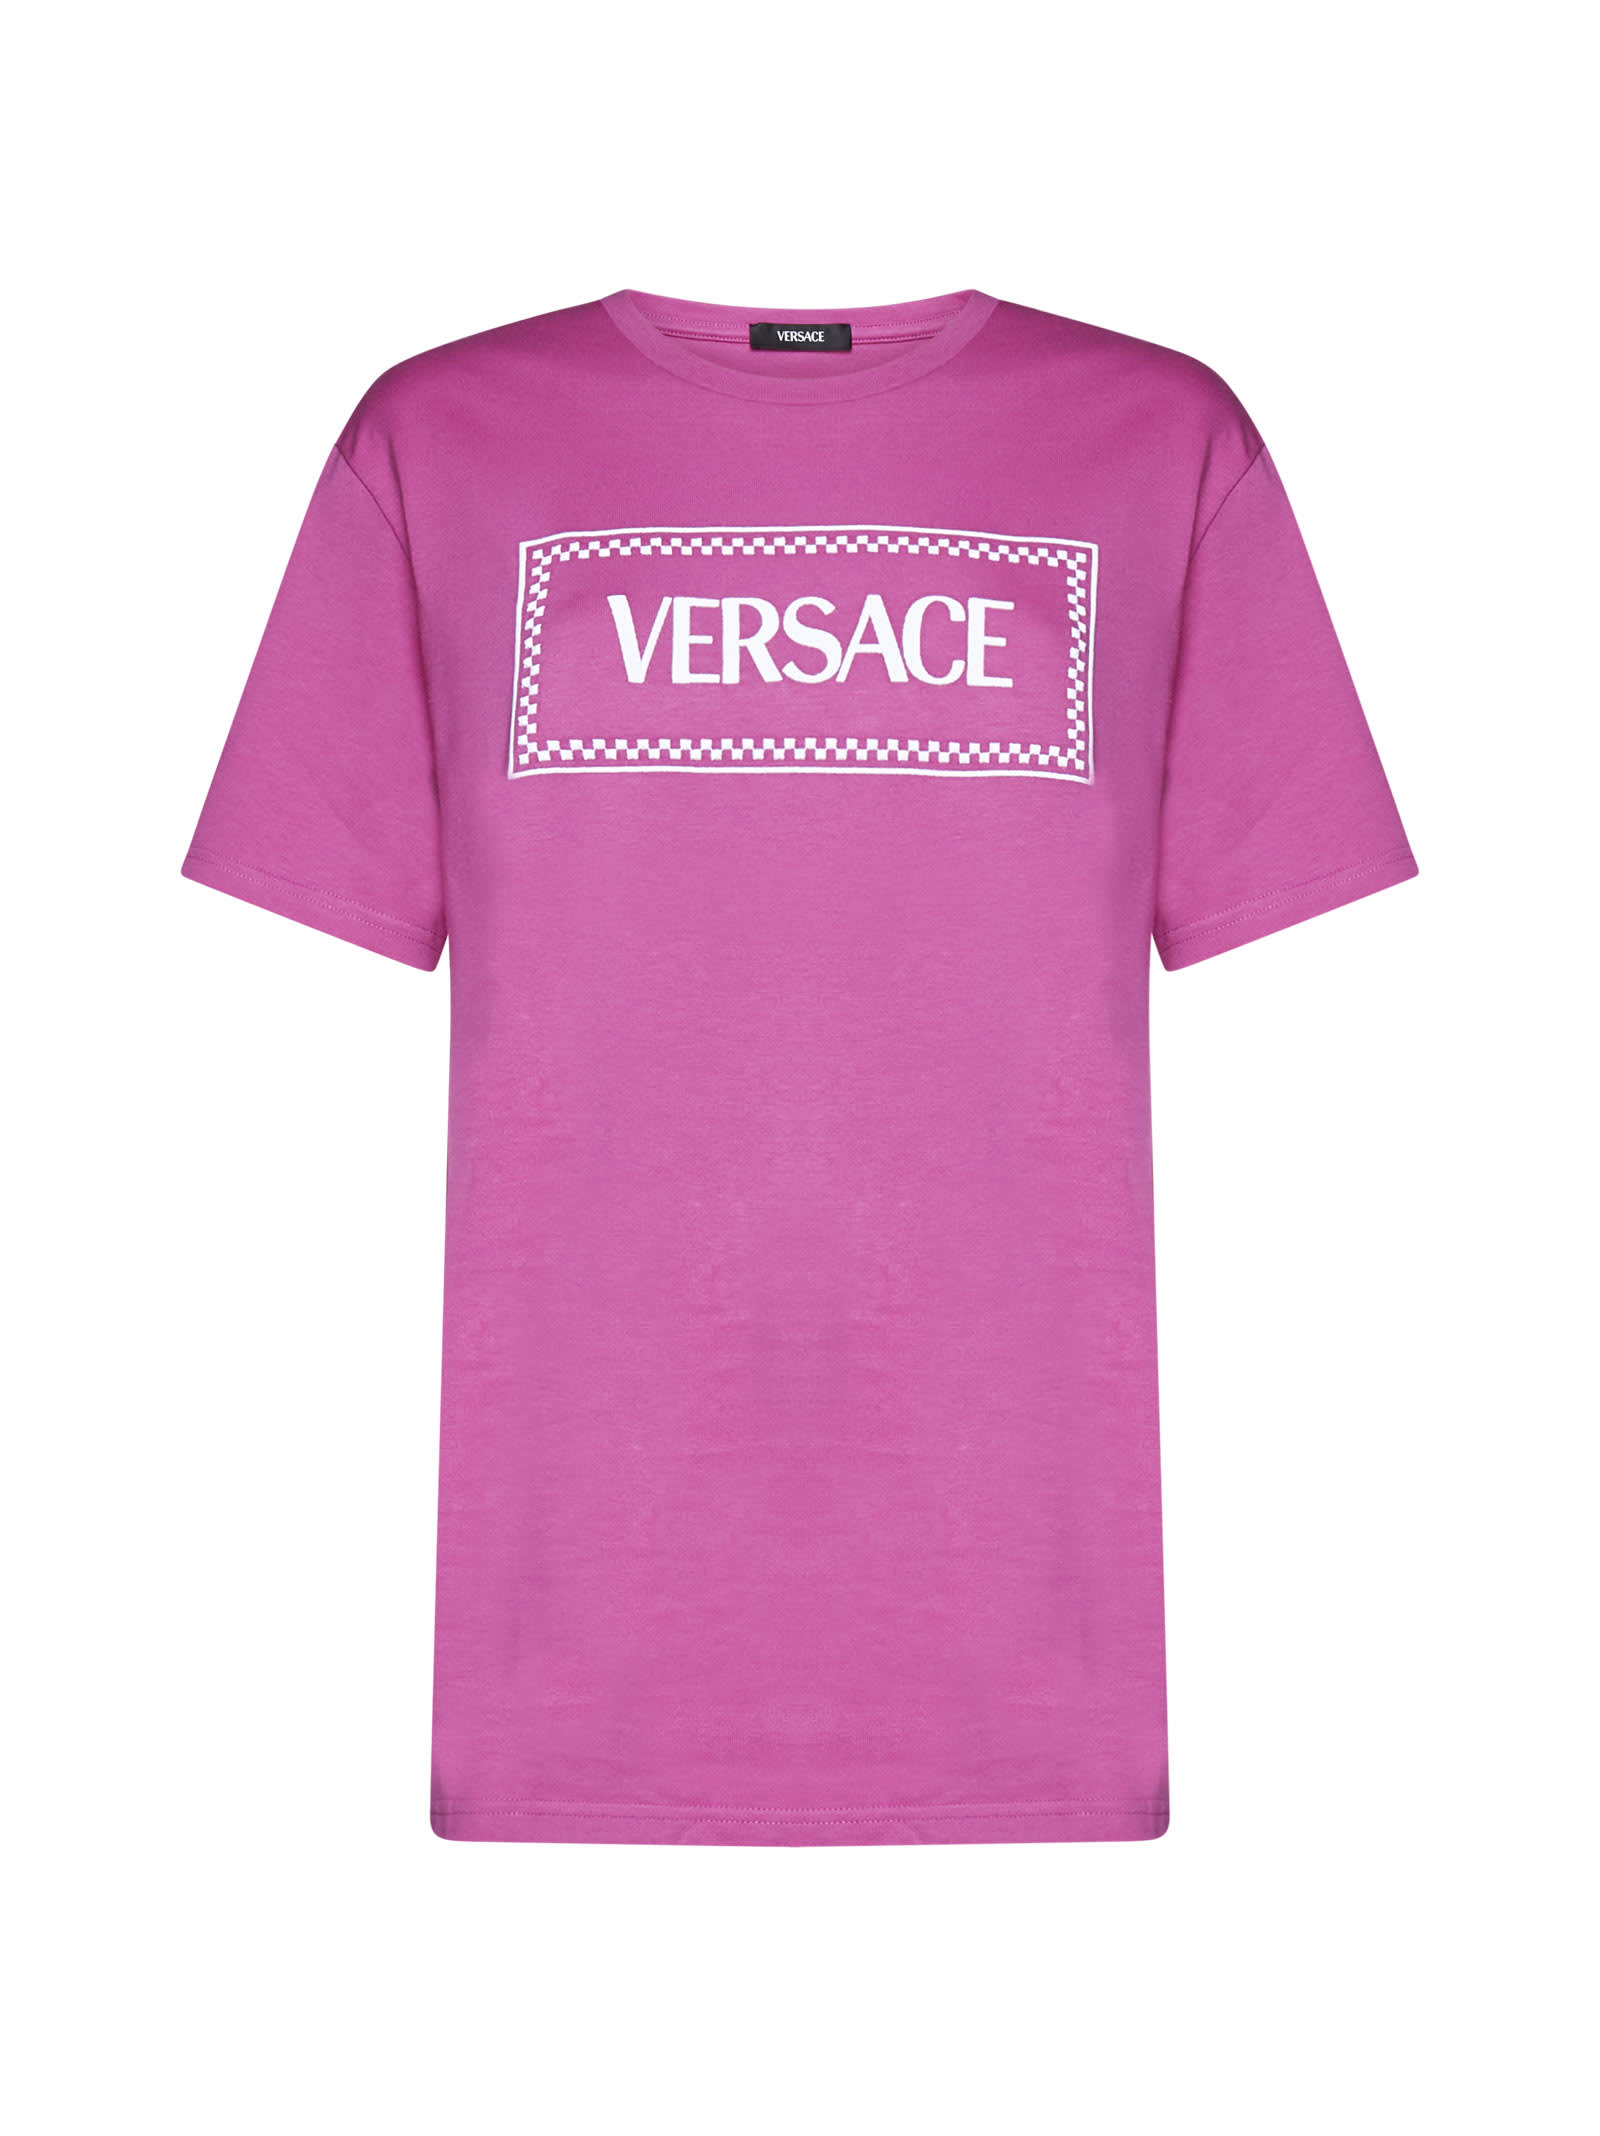 VERSACE T-SHIRT WITH 90S VINTAGE LOGO